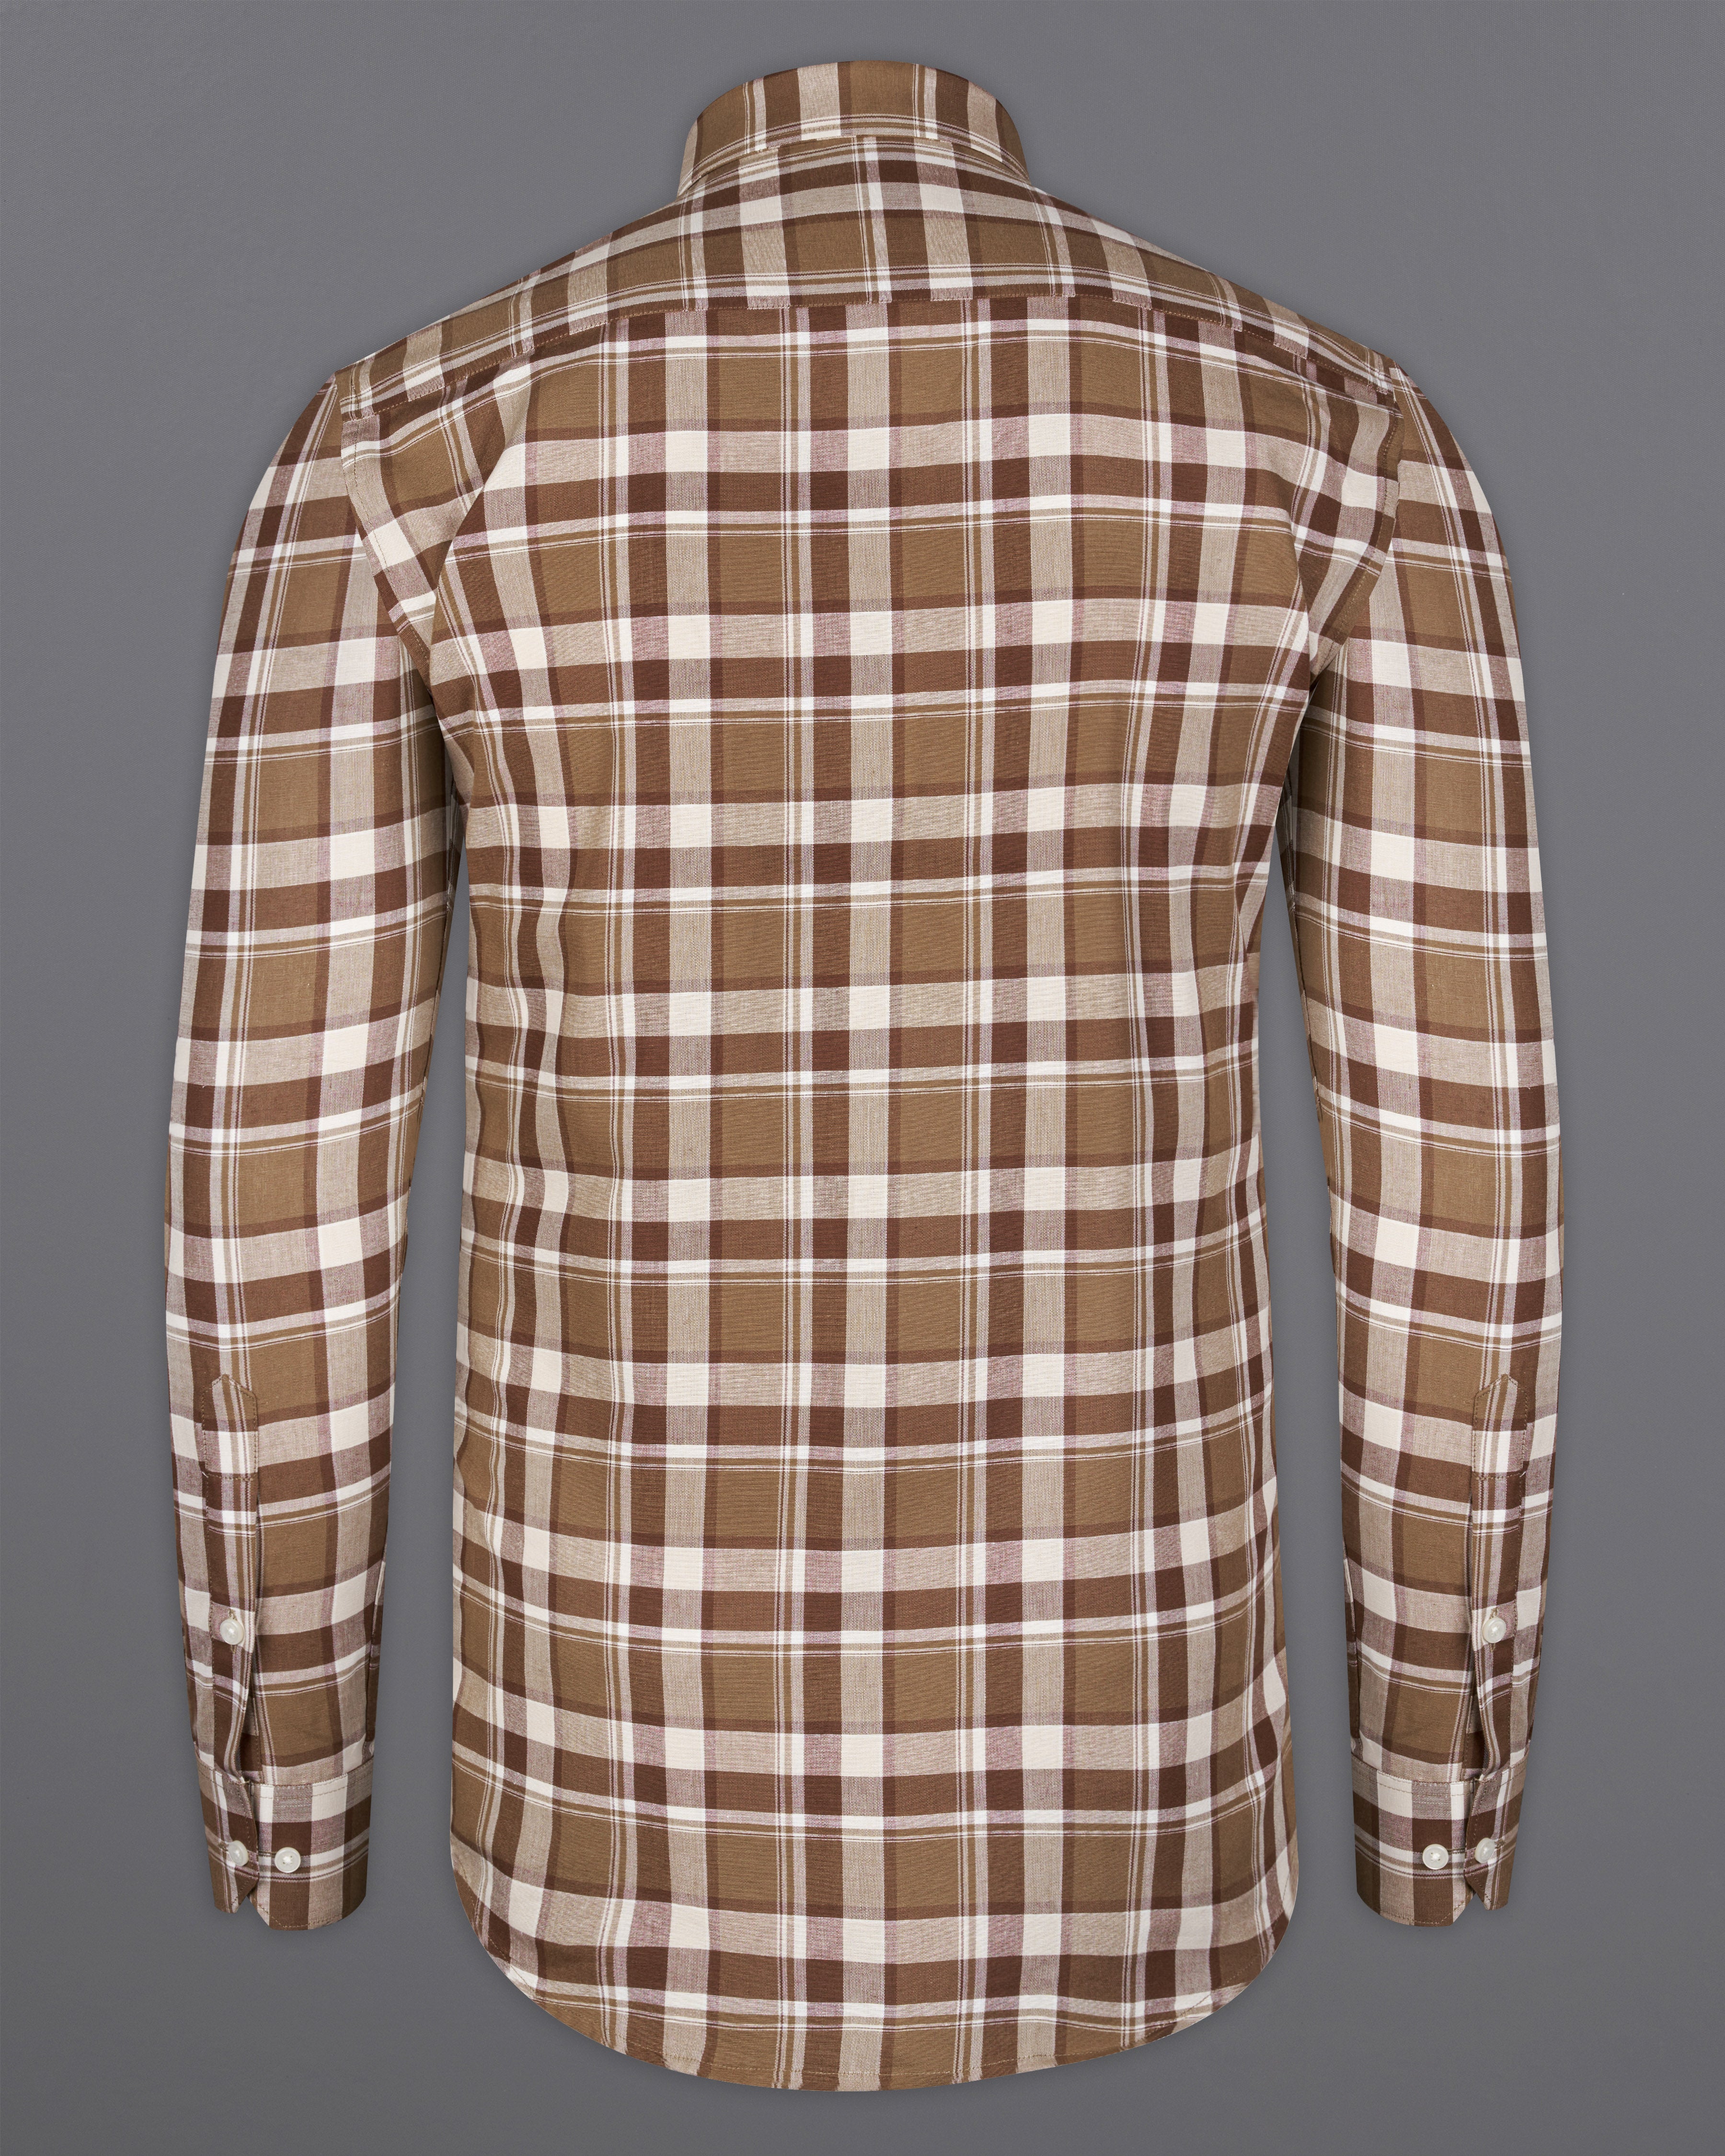 Spice Brown and White Plaid Chambray Button-Down Shirt 9993-BD-38, 9993-BD-H-38, 9993-BD-39, 9993-BD-H-39, 9993-BD-40, 9993-BD-H-40, 9993-BD-42, 9993-BD-H-42, 9993-BD-44, 9993-BD-H-44, 9993-BD-46, 9993-BD-H-46, 9993-BD-48, 9993-BD-H-48, 9993-BD-50, 9993-BD-H-50, 9993-BD-52, 9993-BD-H-52